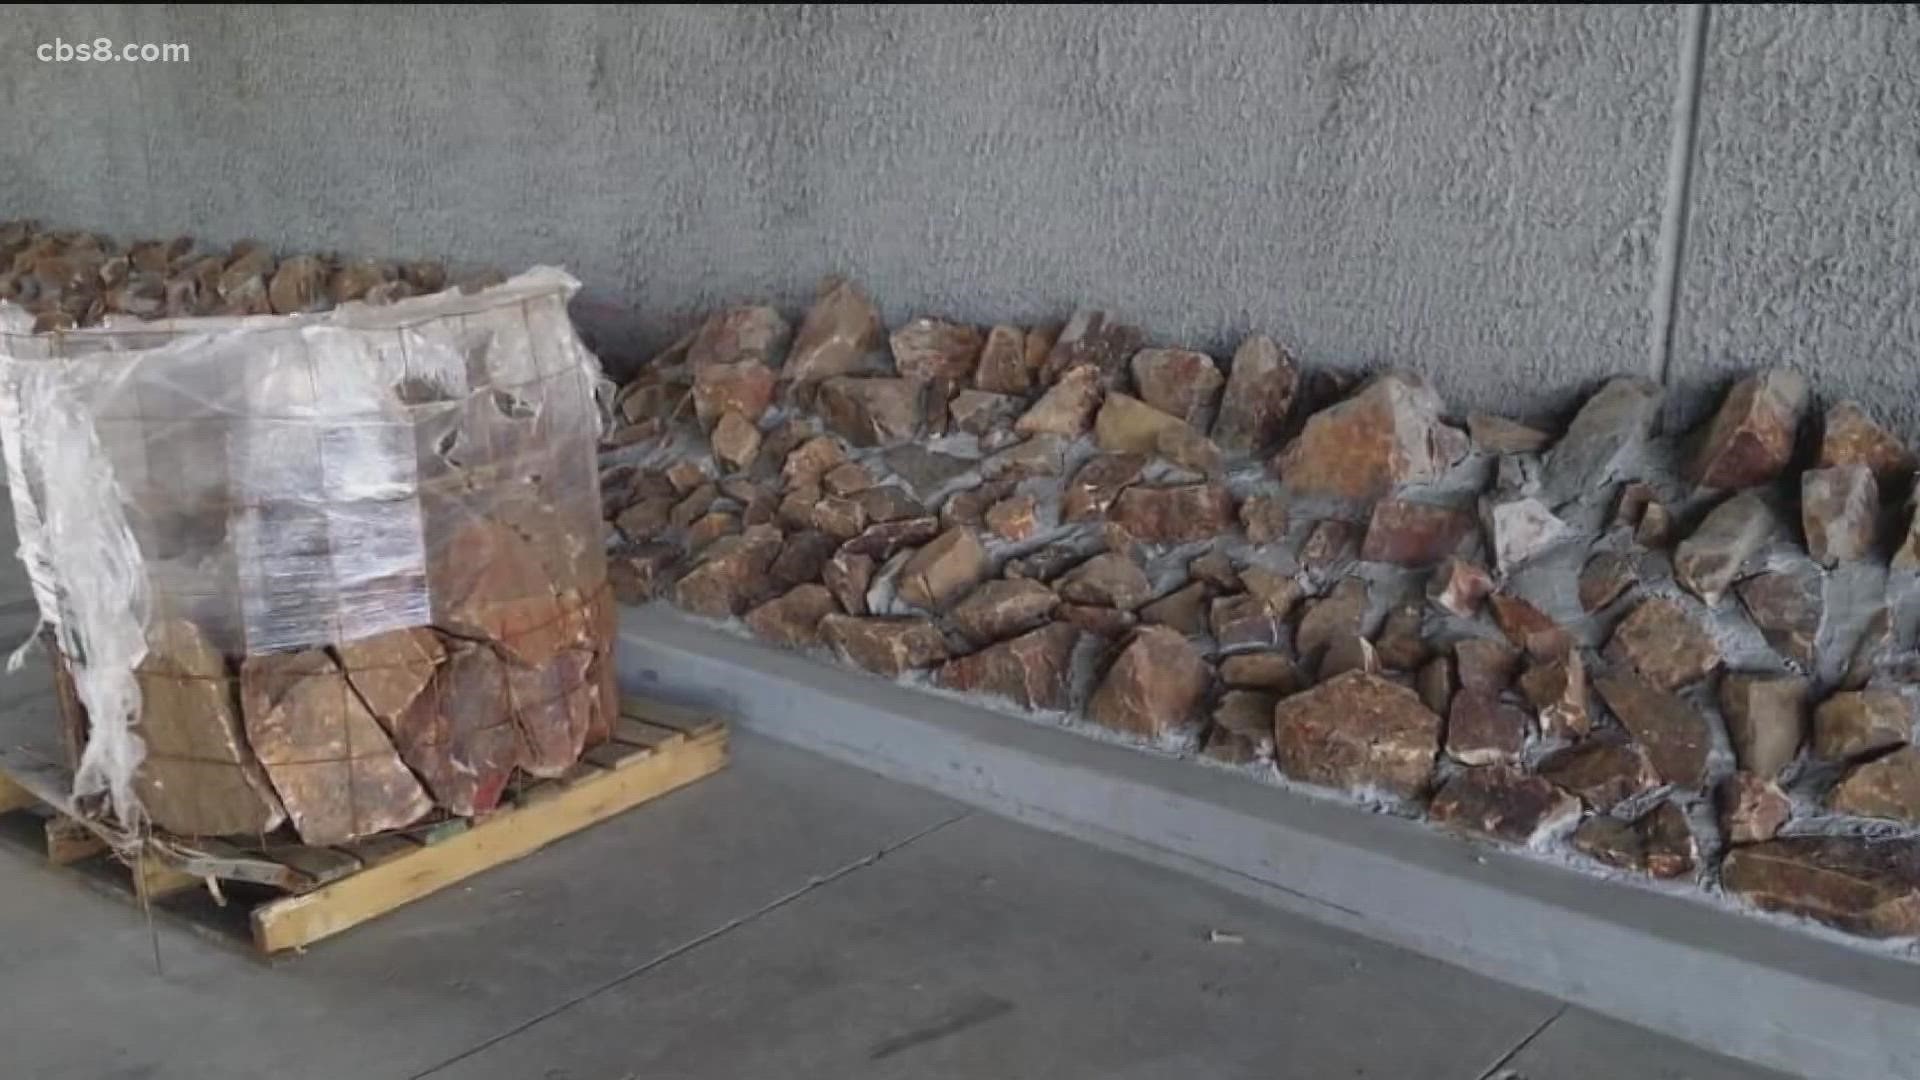 You may have seen benches with armrests or large rocks under bridges. It is what some San Diego homeless advocates call "hostile architecture."